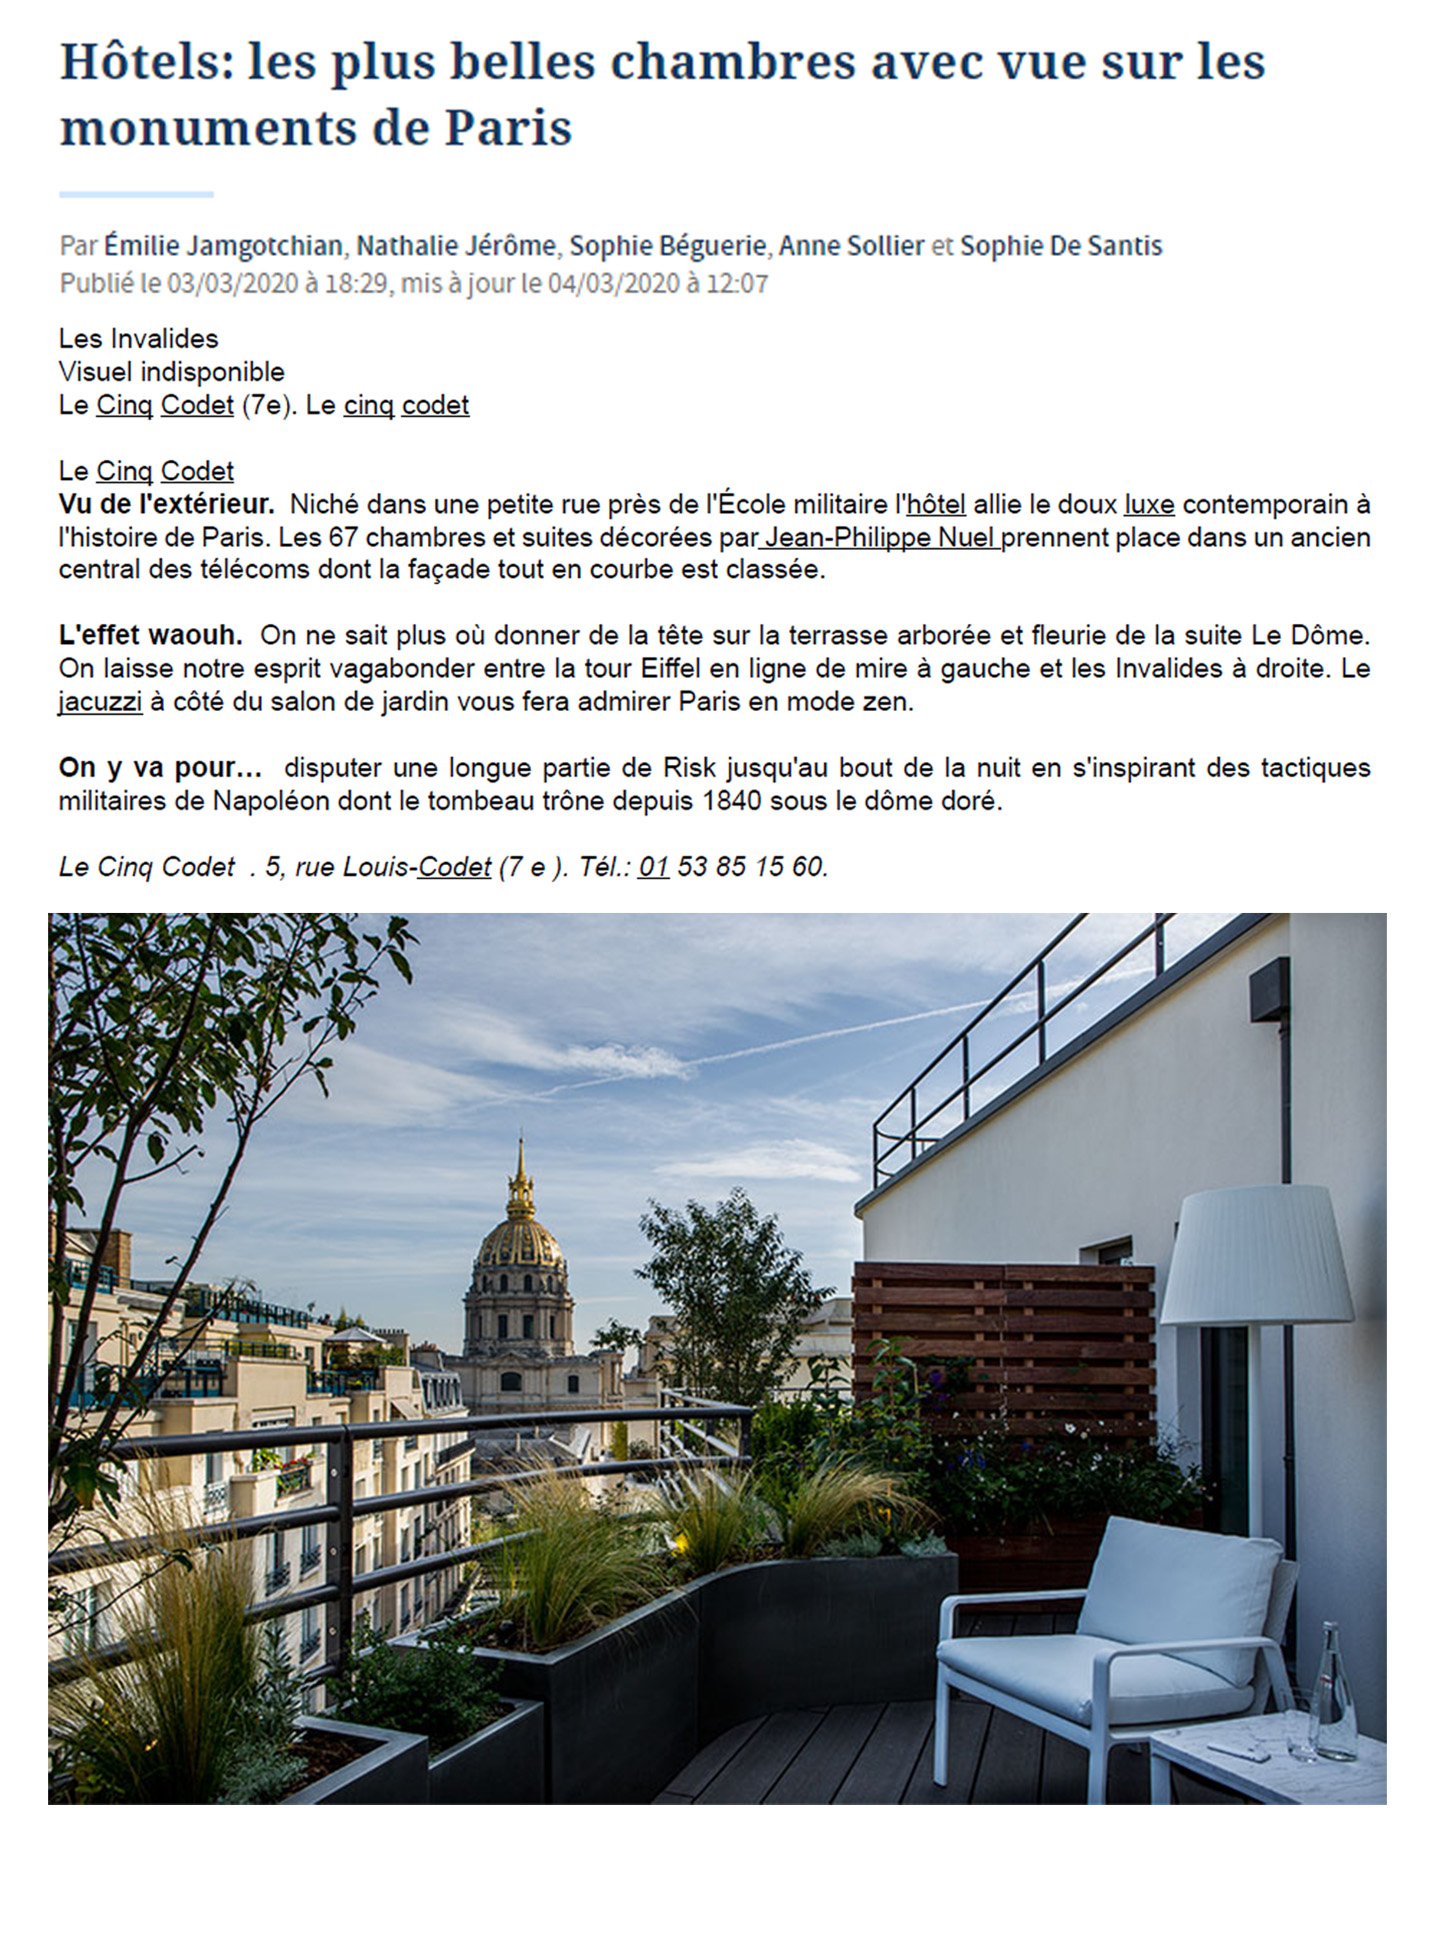 article on the hotel le cinq codet paris, luxury hotel with a breathtaking view of the monuments of paris renovated by the architect and interior designer jean-philippe nuel